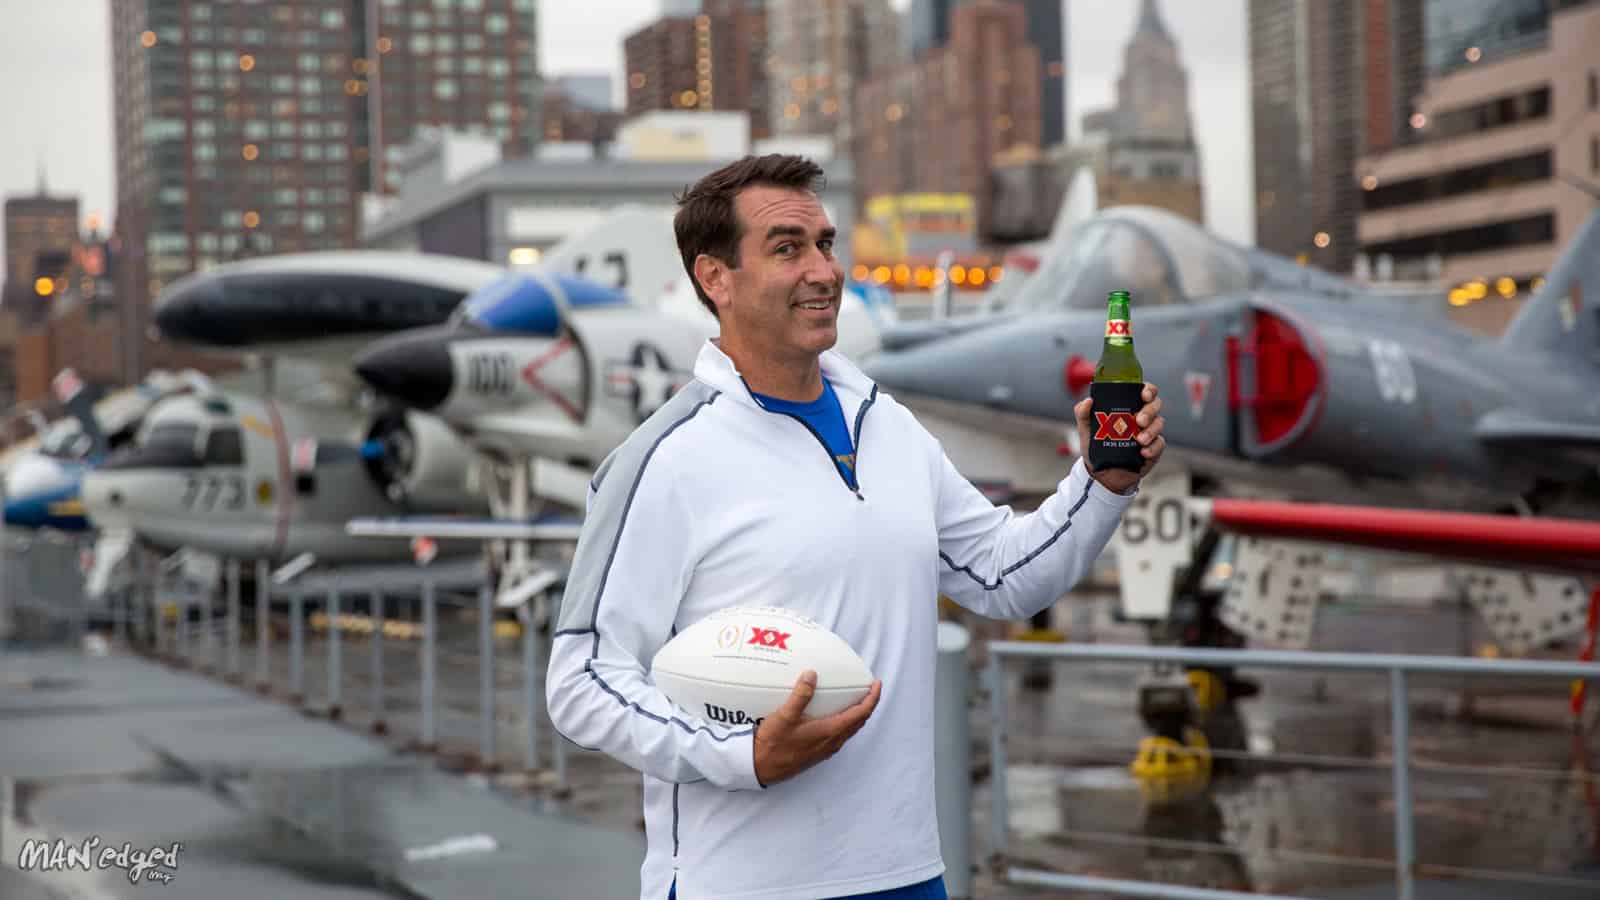 Rob Riggle with Dos Equis